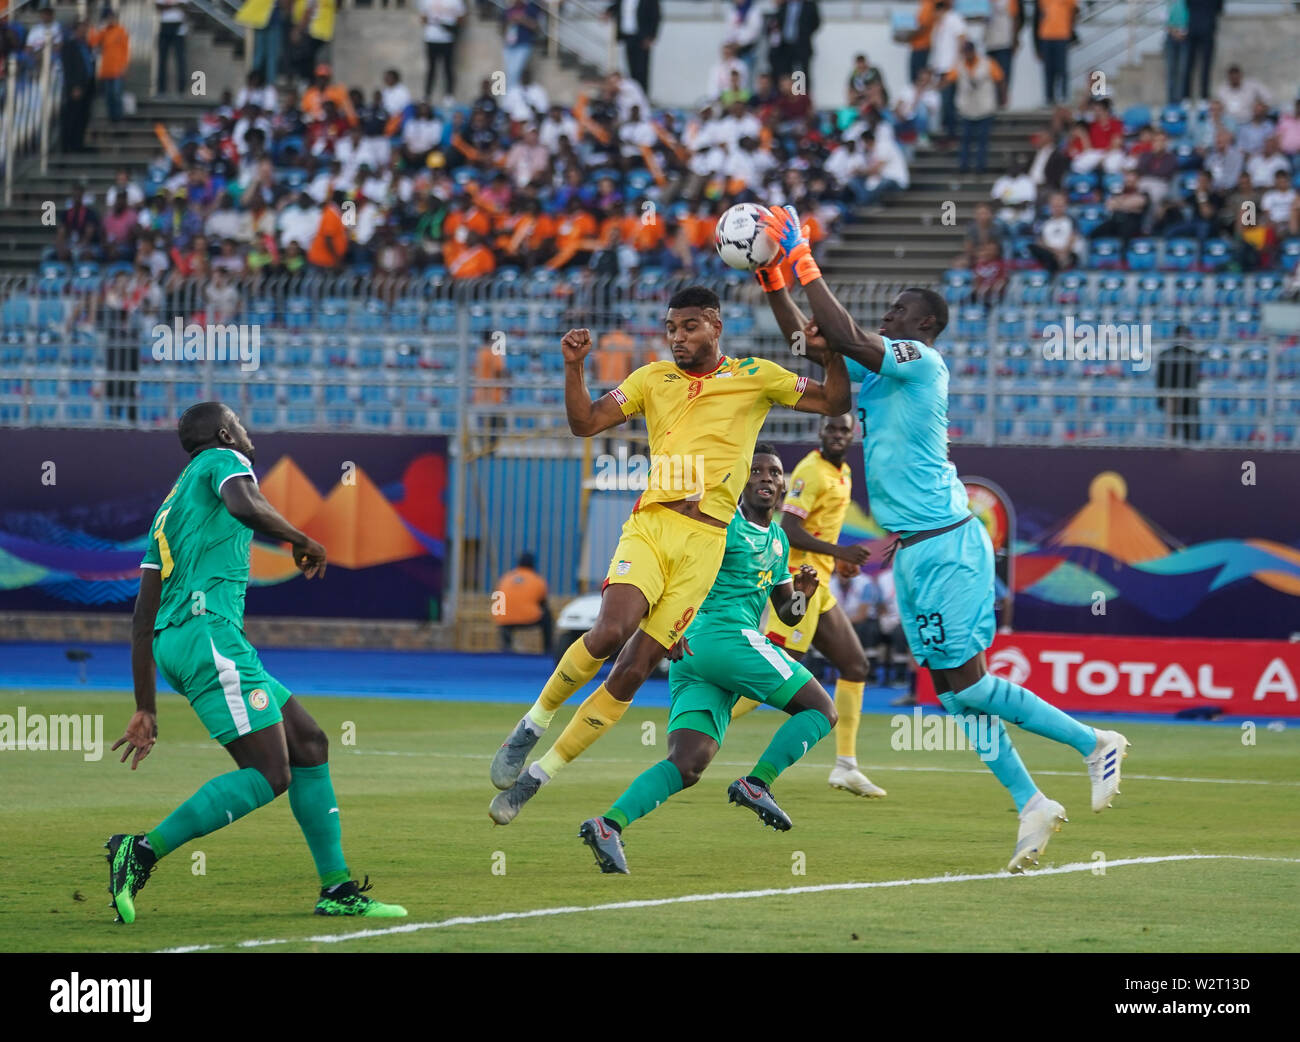 Cairo, Senegal, Egypt. 10th July, 2019. FRANCE OUT July 10, 2019: Amigo Alfred Junior Gomis of Senegal catching the ball in front of Steve Michel Mounie of Benin during the 2019 African Cup of Nations match between Senegal and Benin at the 30 June Stadium in Cairo, Egypt. Ulrik Pedersen/CSM/Alamy Live News Stock Photo